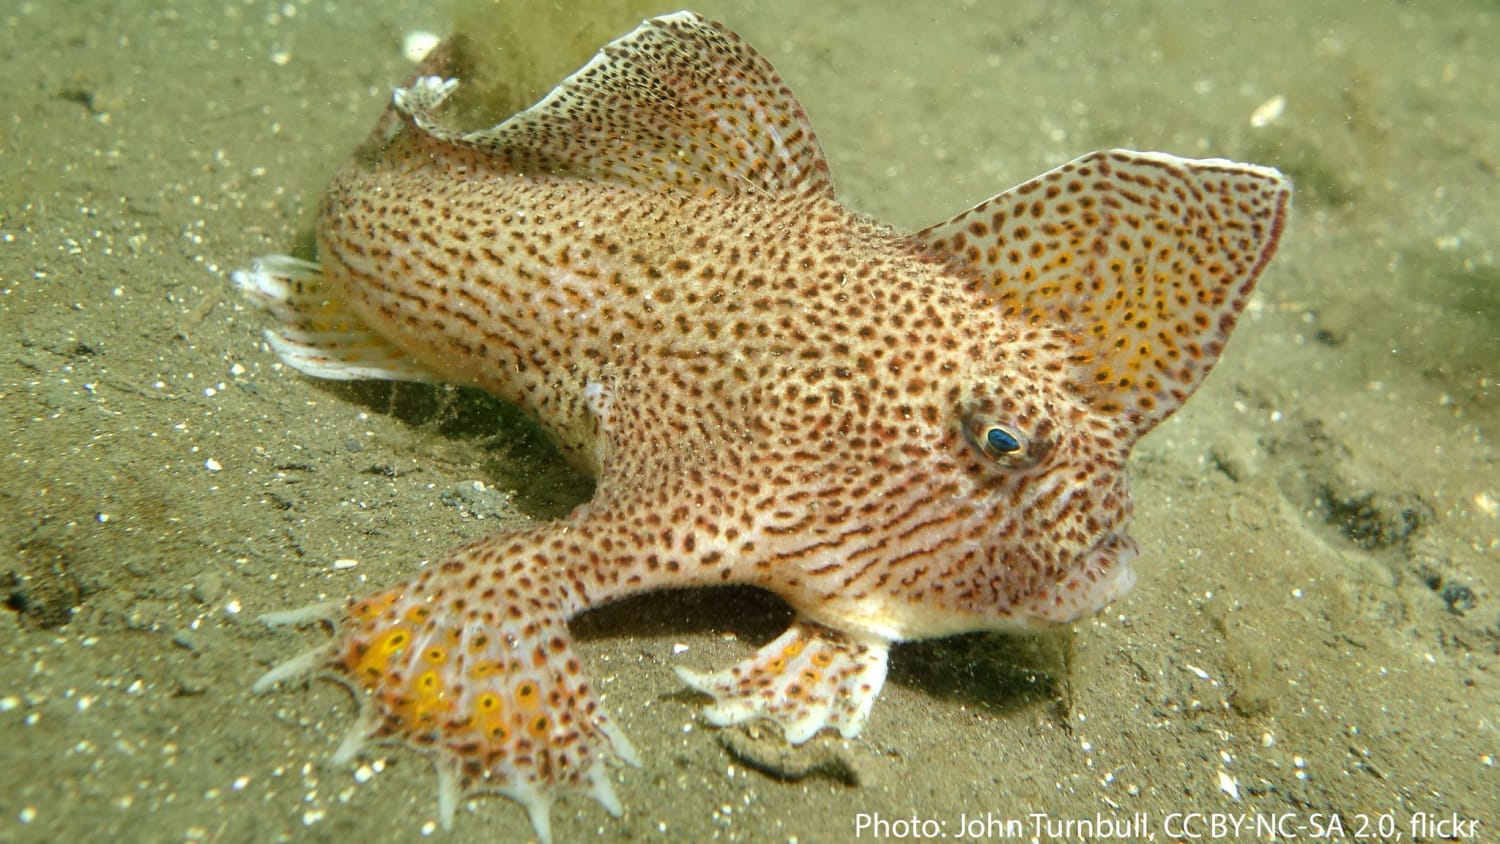 Need a hand? The spotted handfish might be able to lend one! Its name refers to its unusual fins, which it uses to “crawl” along the seafloor. Fun fact: the spotted patterns are unique to each individual! This fish inhabits the waters of Tasmania.